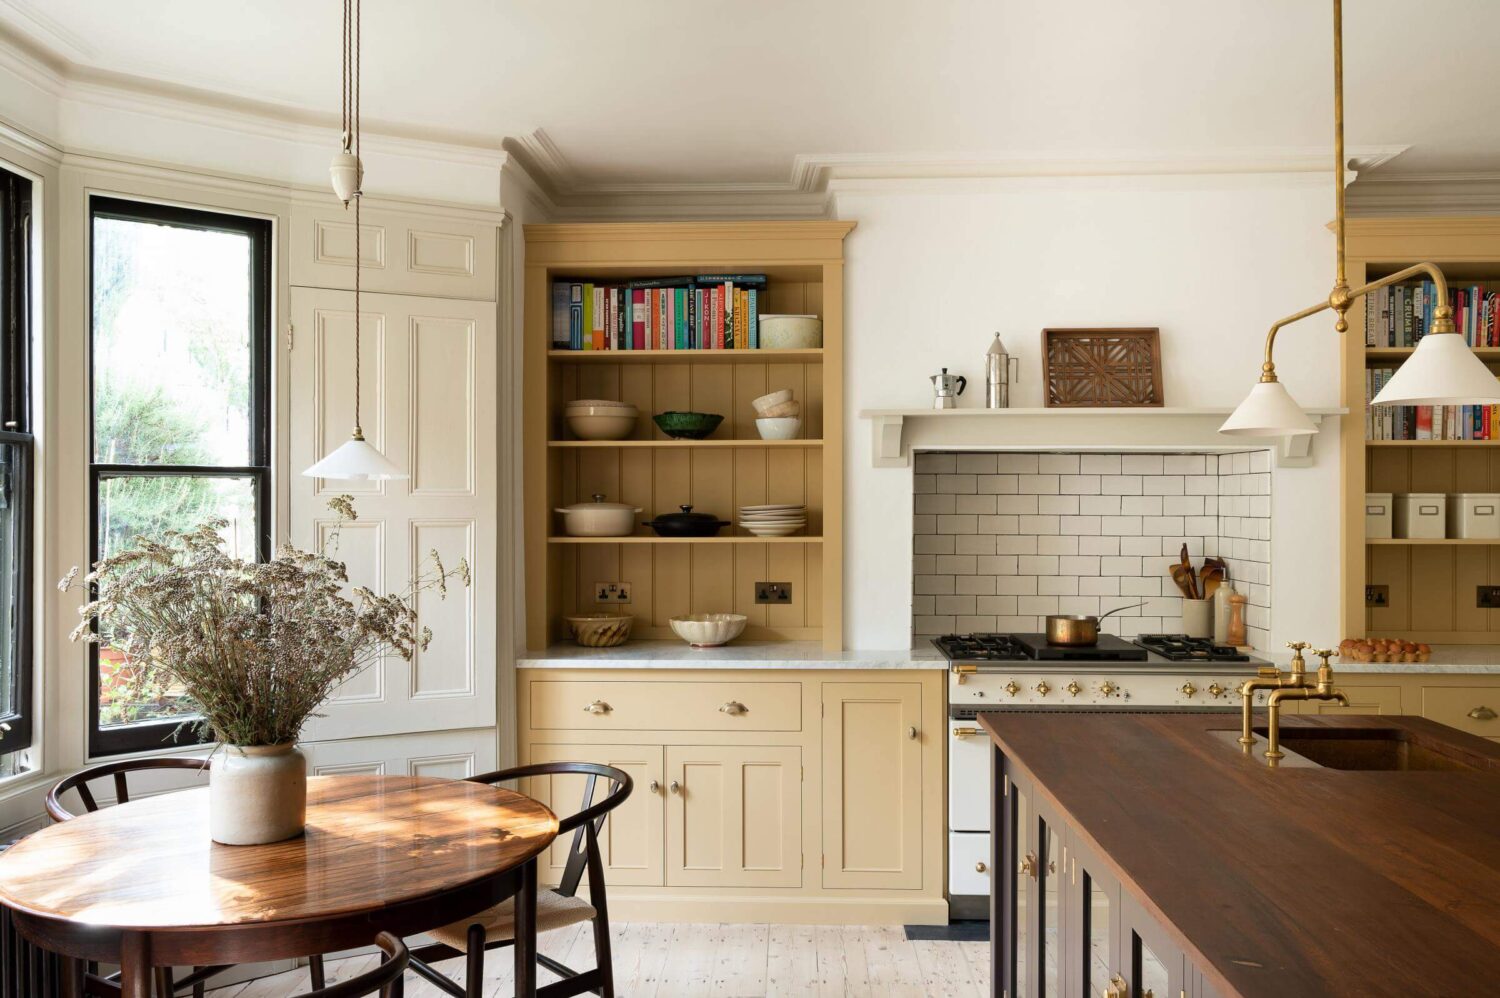 devol-kitchen-yellow-brown-cabinets-round-table-bay-window-nordroom